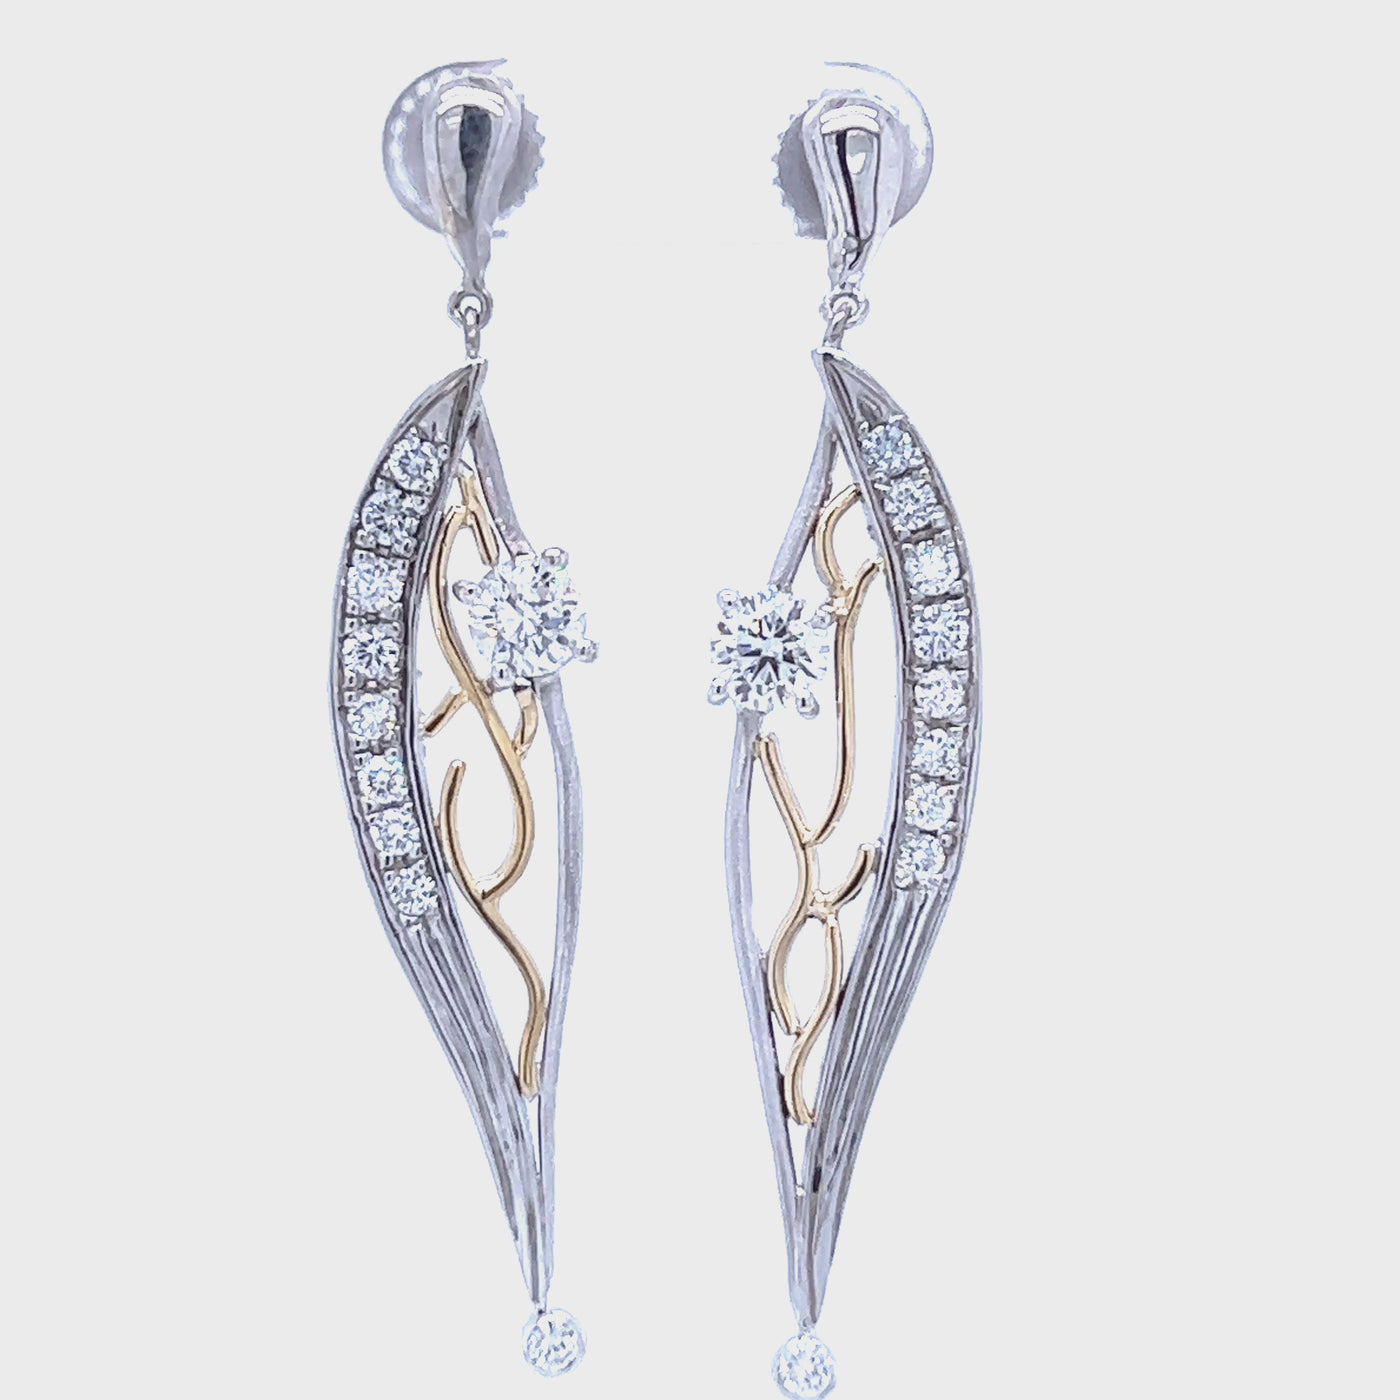 Custom Two-Tone White and Yellow Gold Diamond Drop Earrings by Paul Richter